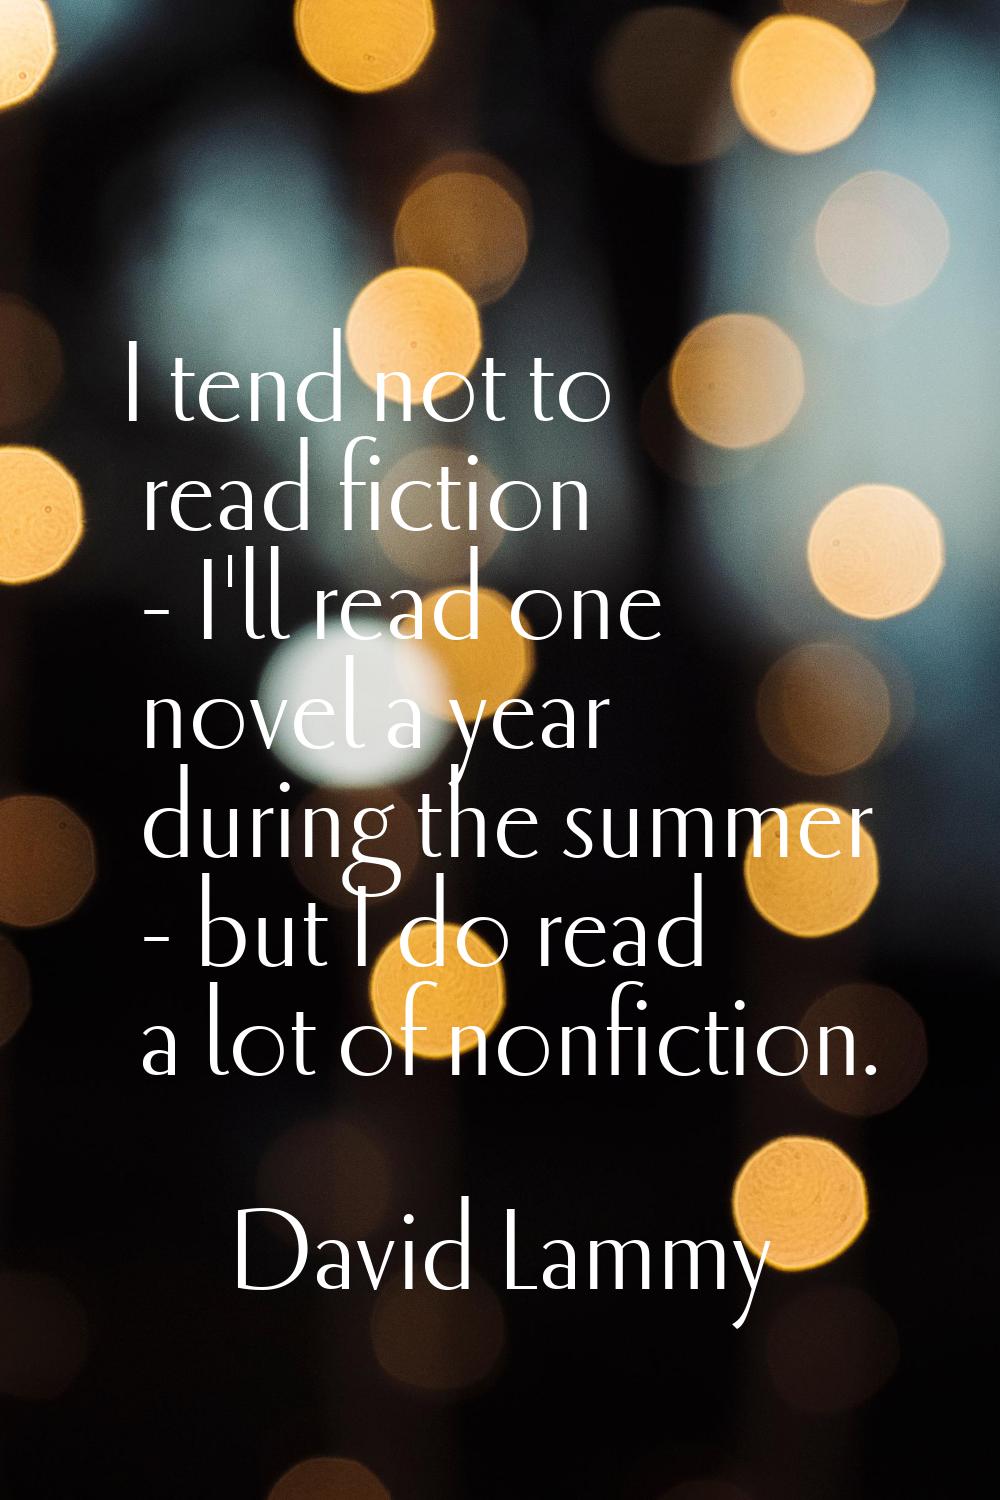 I tend not to read fiction - I'll read one novel a year during the summer - but I do read a lot of 